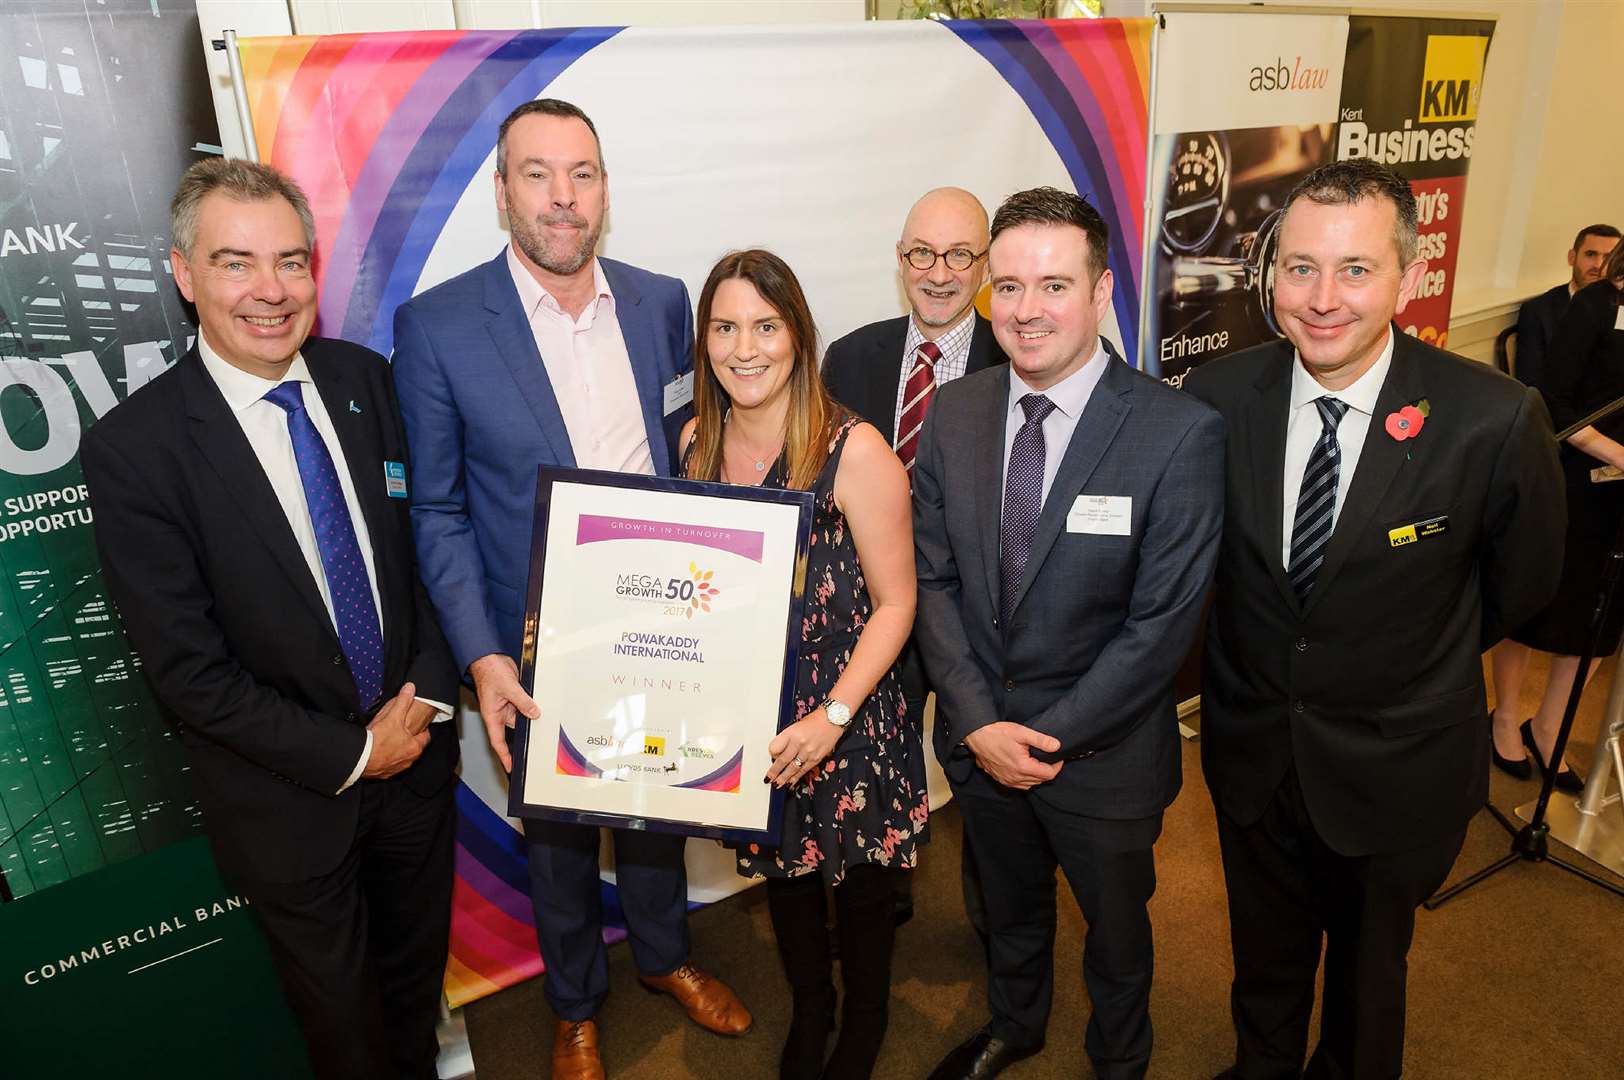 PowaKaddy boss David Catford, second left, picks up the MegaGrowth 2017 winner's certificate with, from left, Andrew Griggs of Kreston Reeves, wife Adele, Shaun Kelly of asb law, Gavin Potter of Lloyds Bank and Neil Webster of KM Group